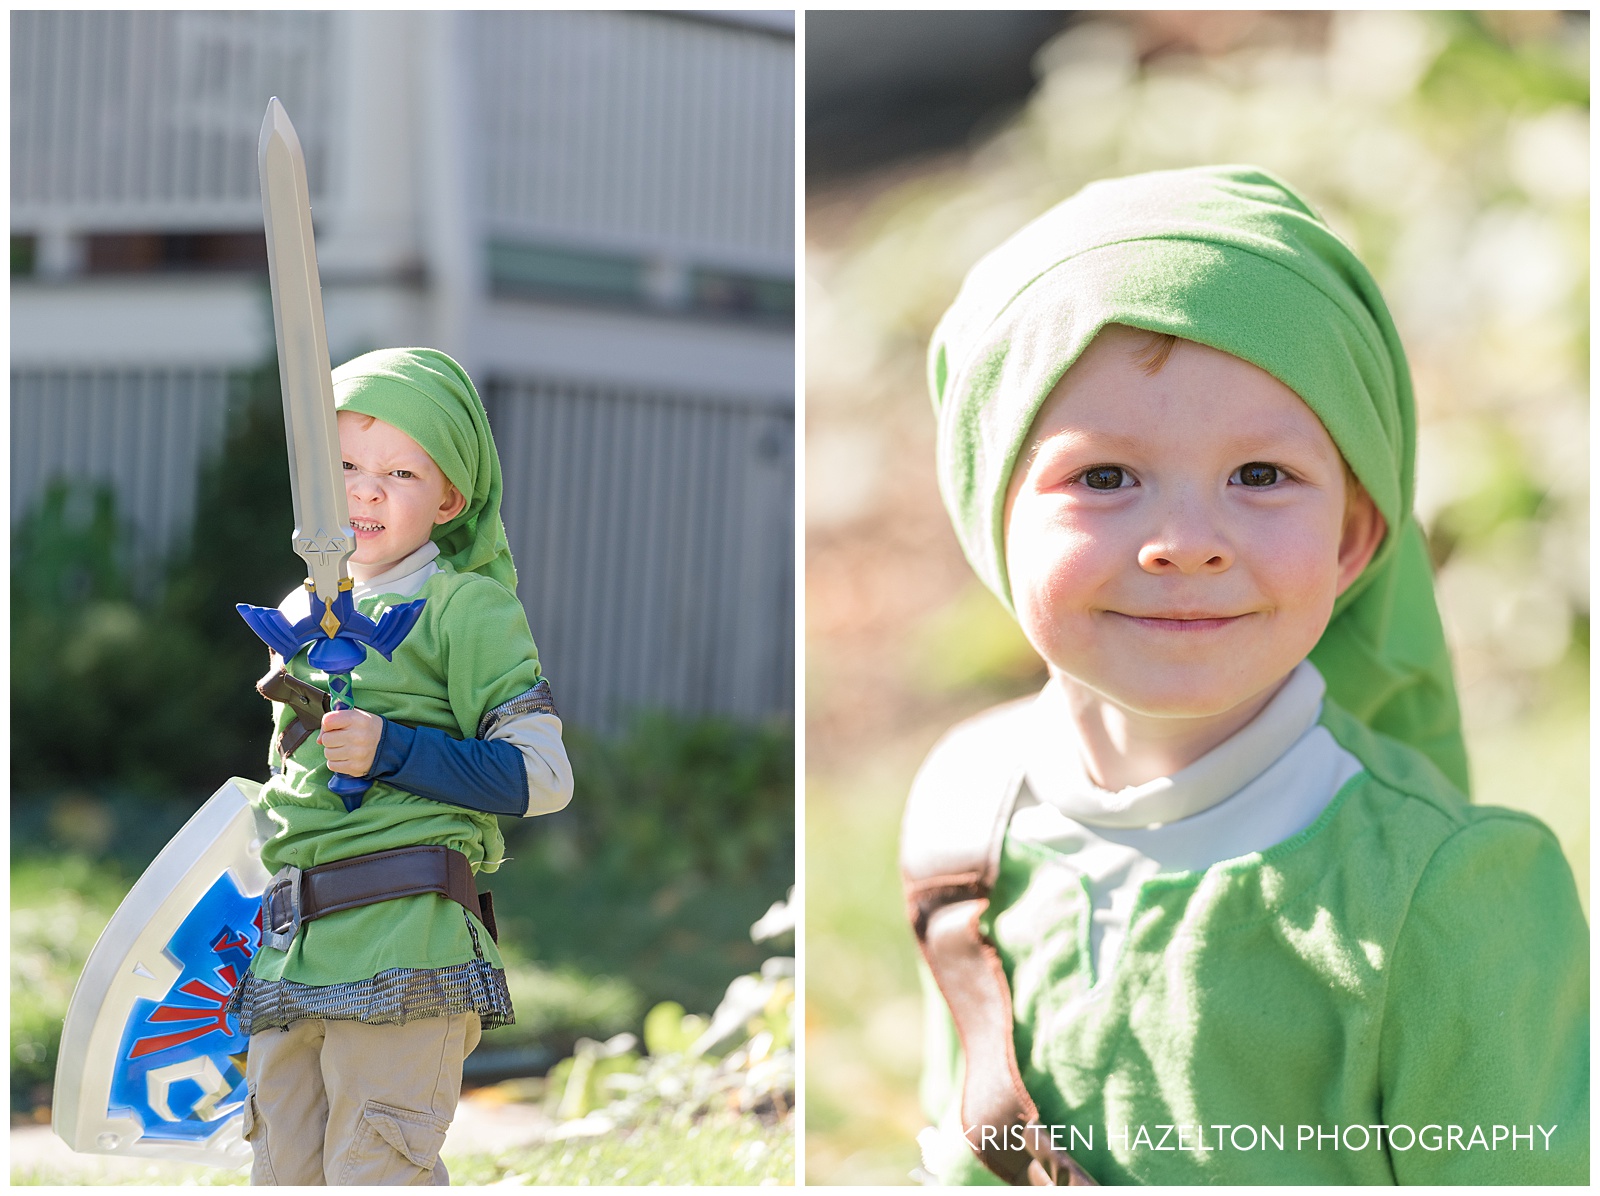 Four year old boy dressed up as Link